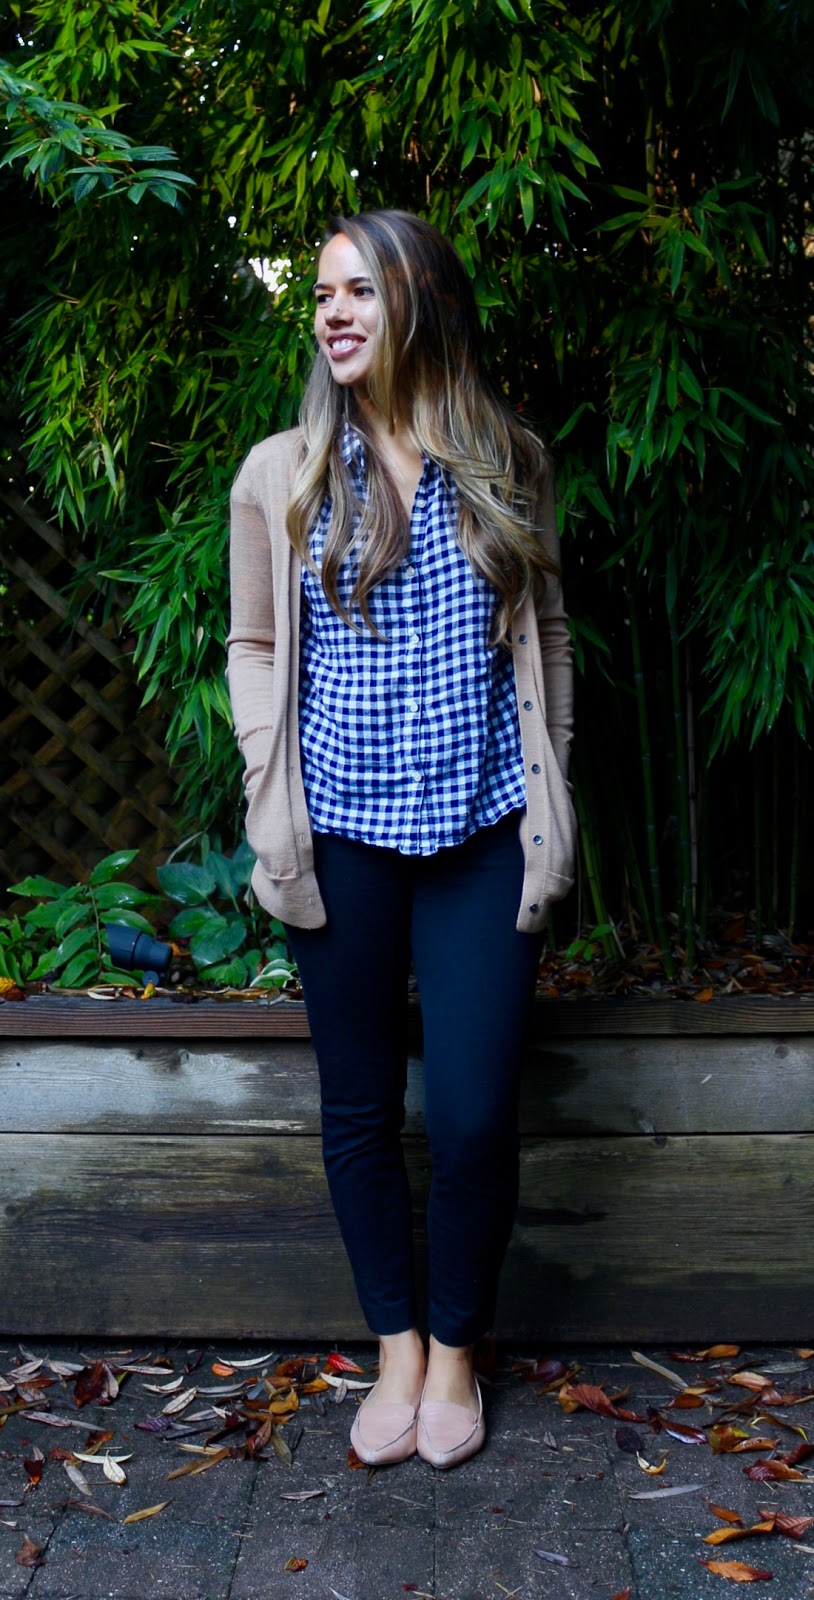 Jules in Flats - Gingham Button Down with Camel Cardigan (Business Casual Fall Workwear on a Budget) 